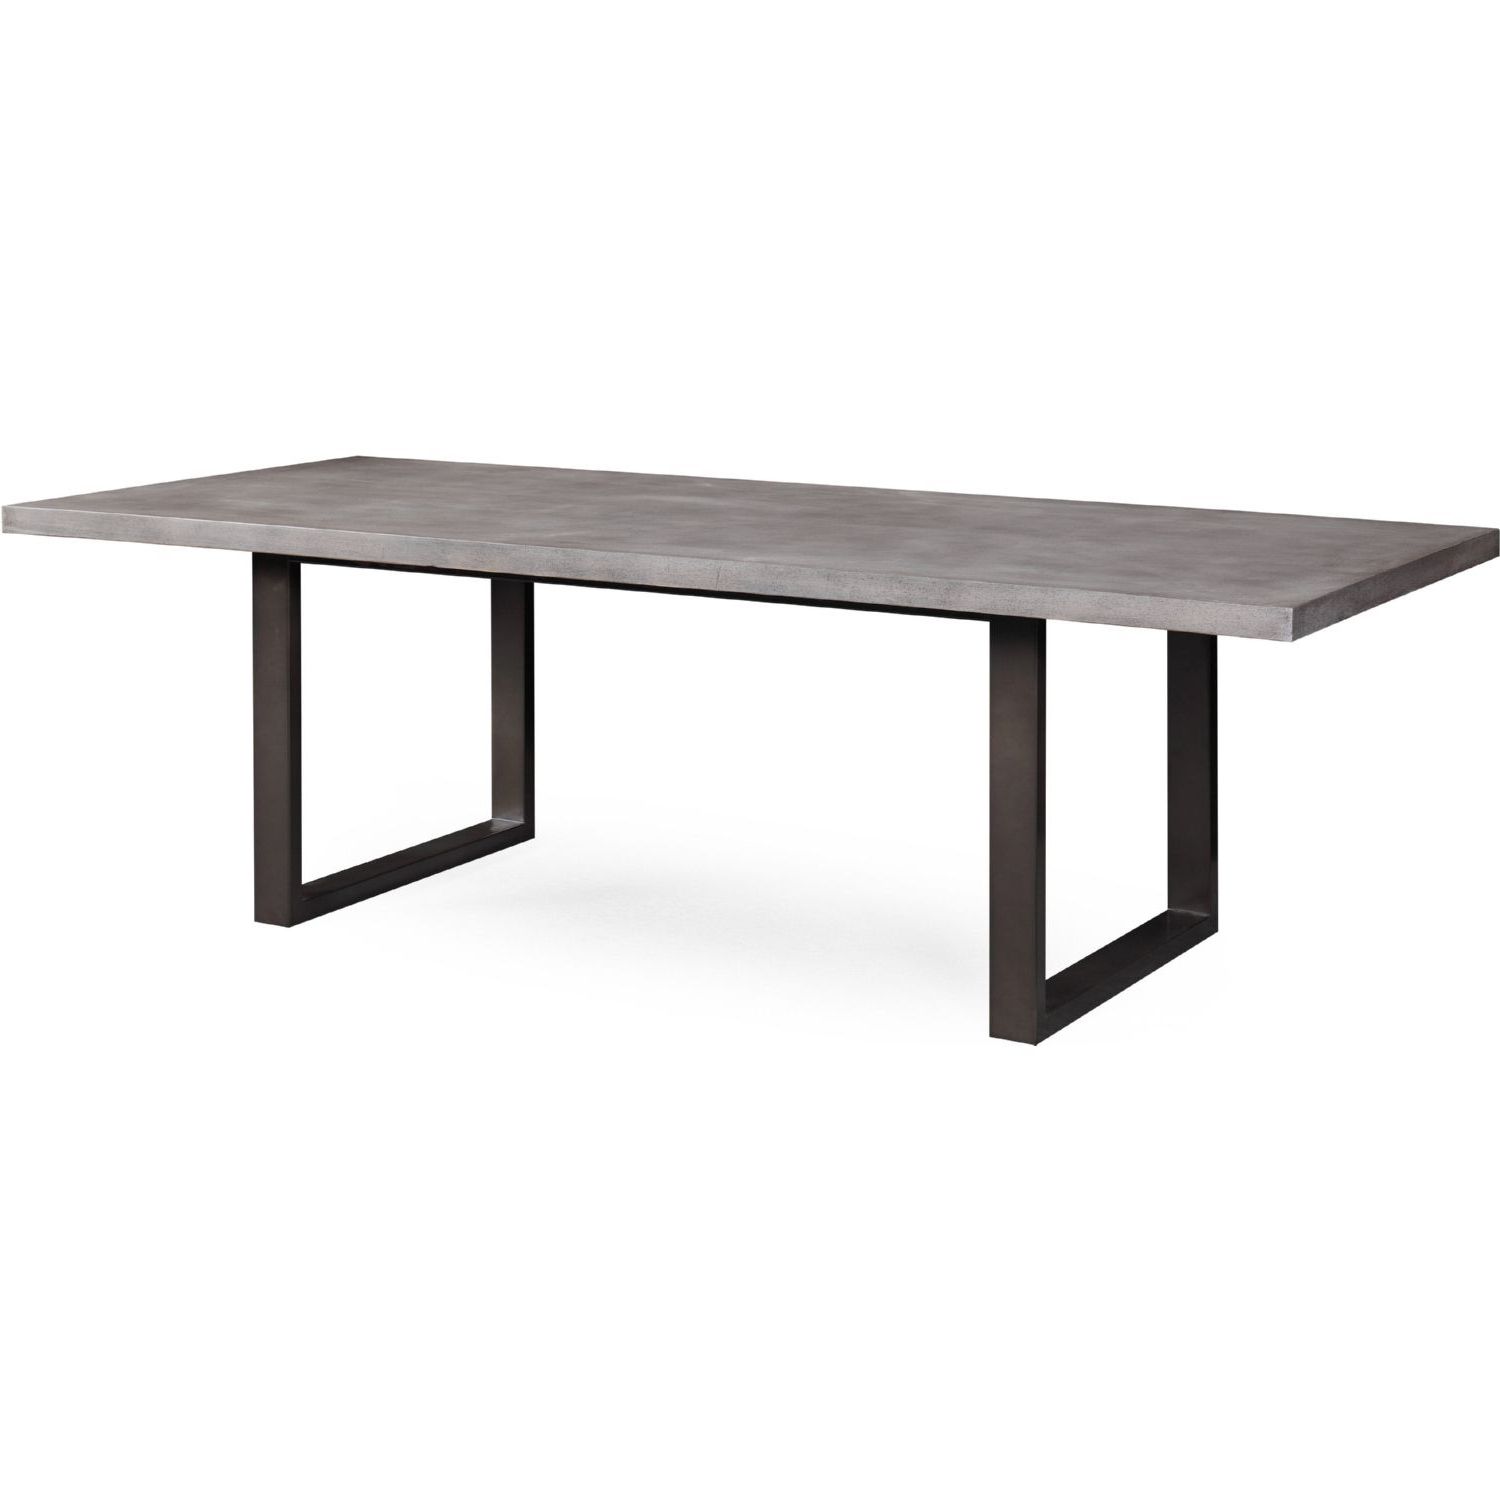 Edna 94" Grey Concrete Dining Table On Black Steel Legs Inside Famous Dining Tables In Seared Oak With Brass Detail (View 12 of 25)